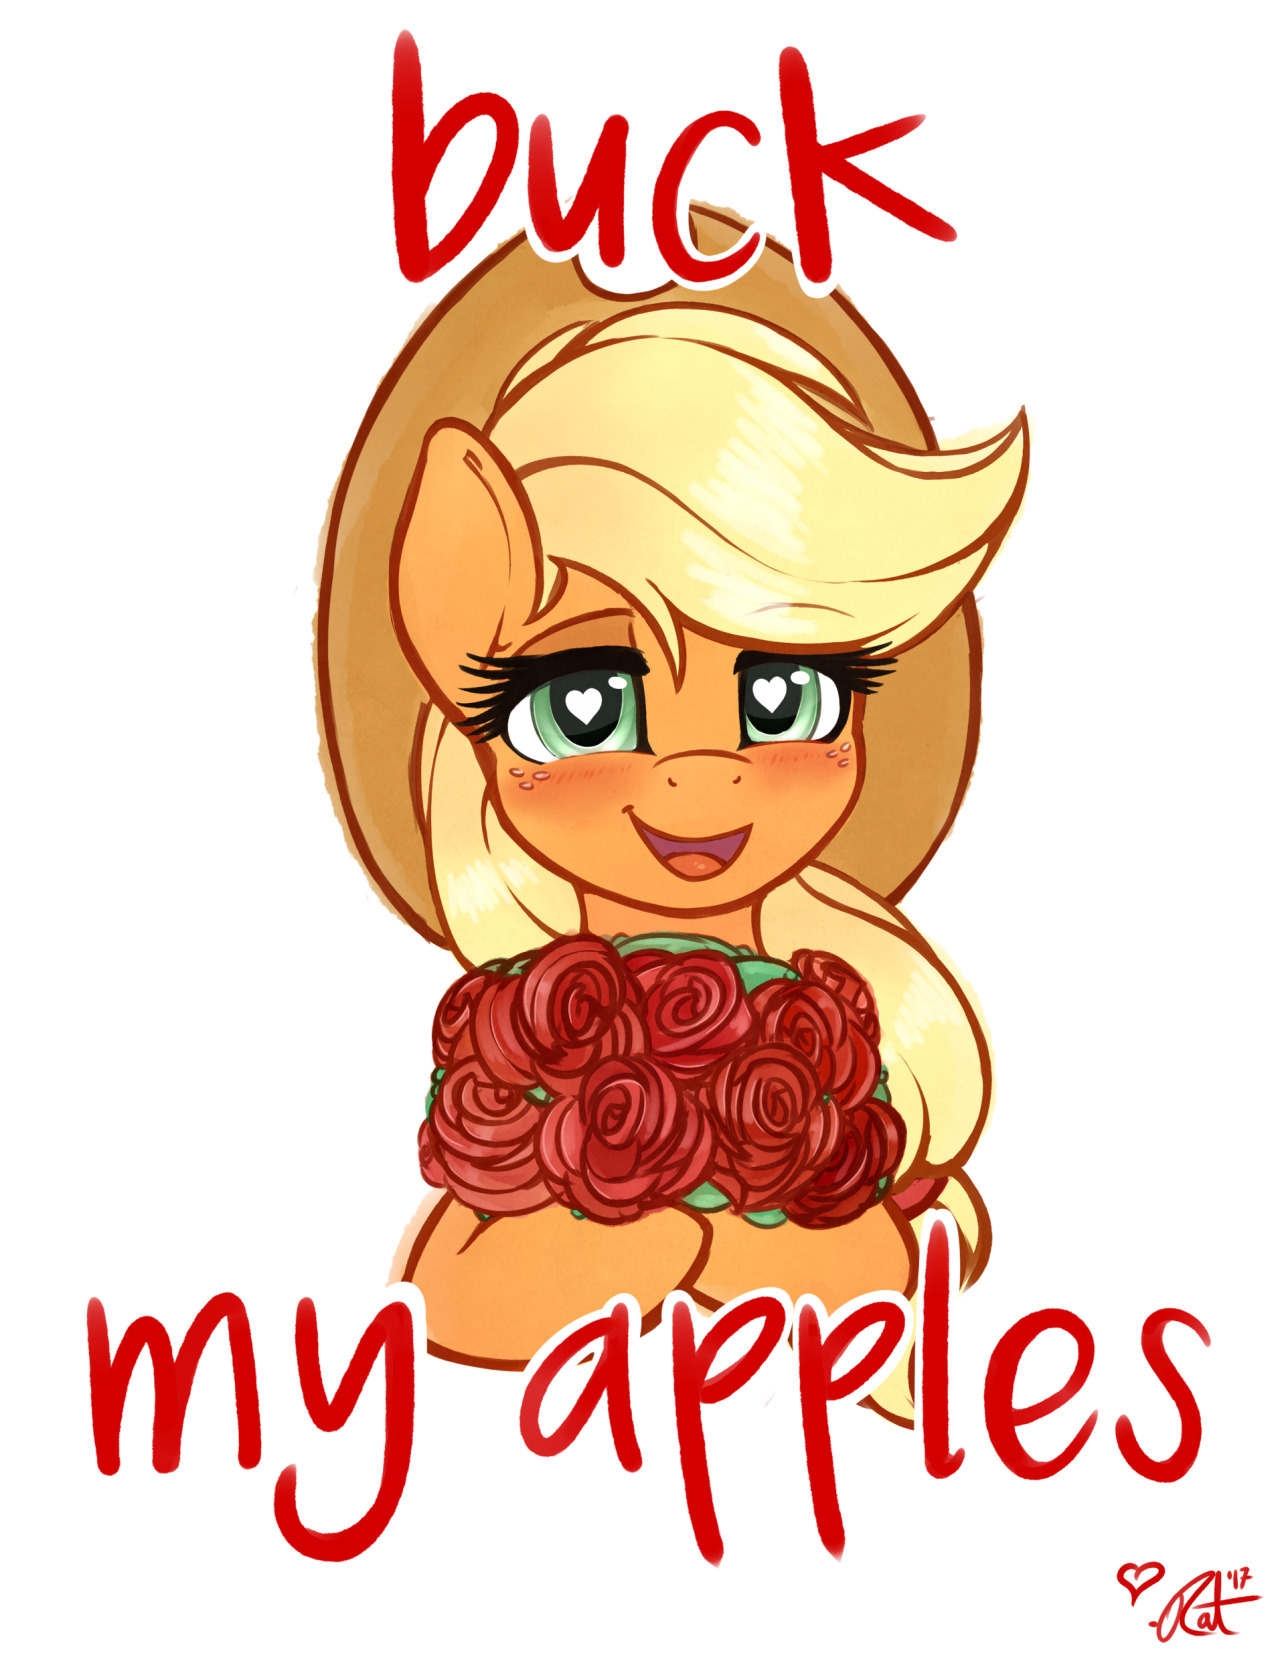 Happy Valentine’s Day everyone! I know not everyone loves AJ as much as I do, but